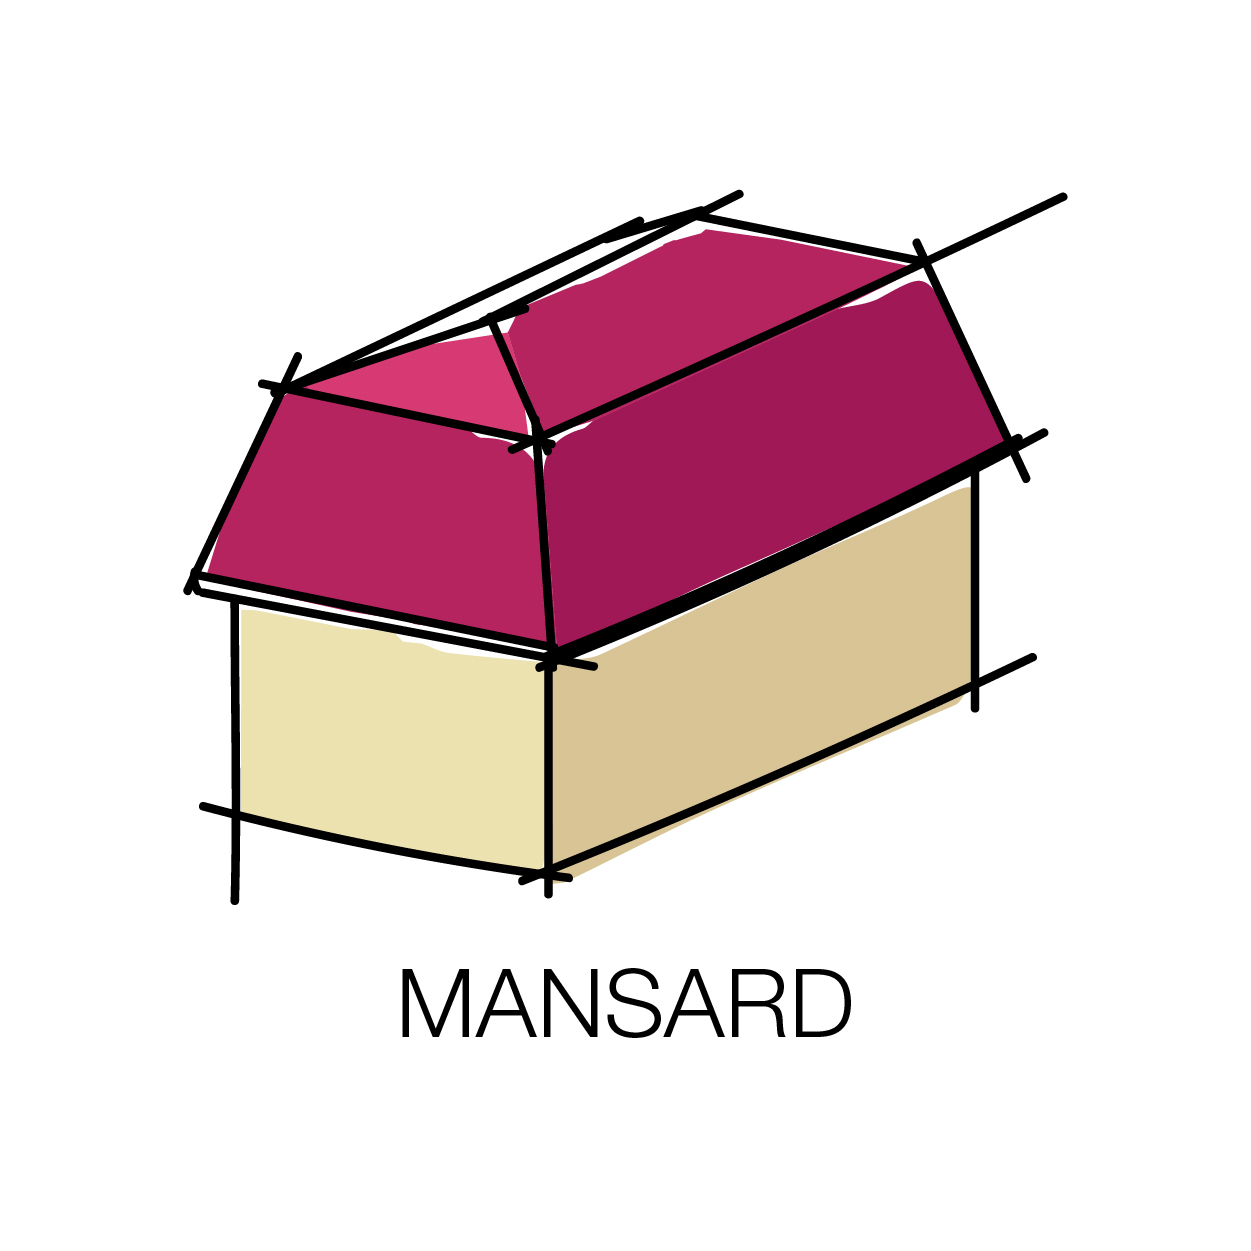 The advantages and disadvantages of a
mansard roof